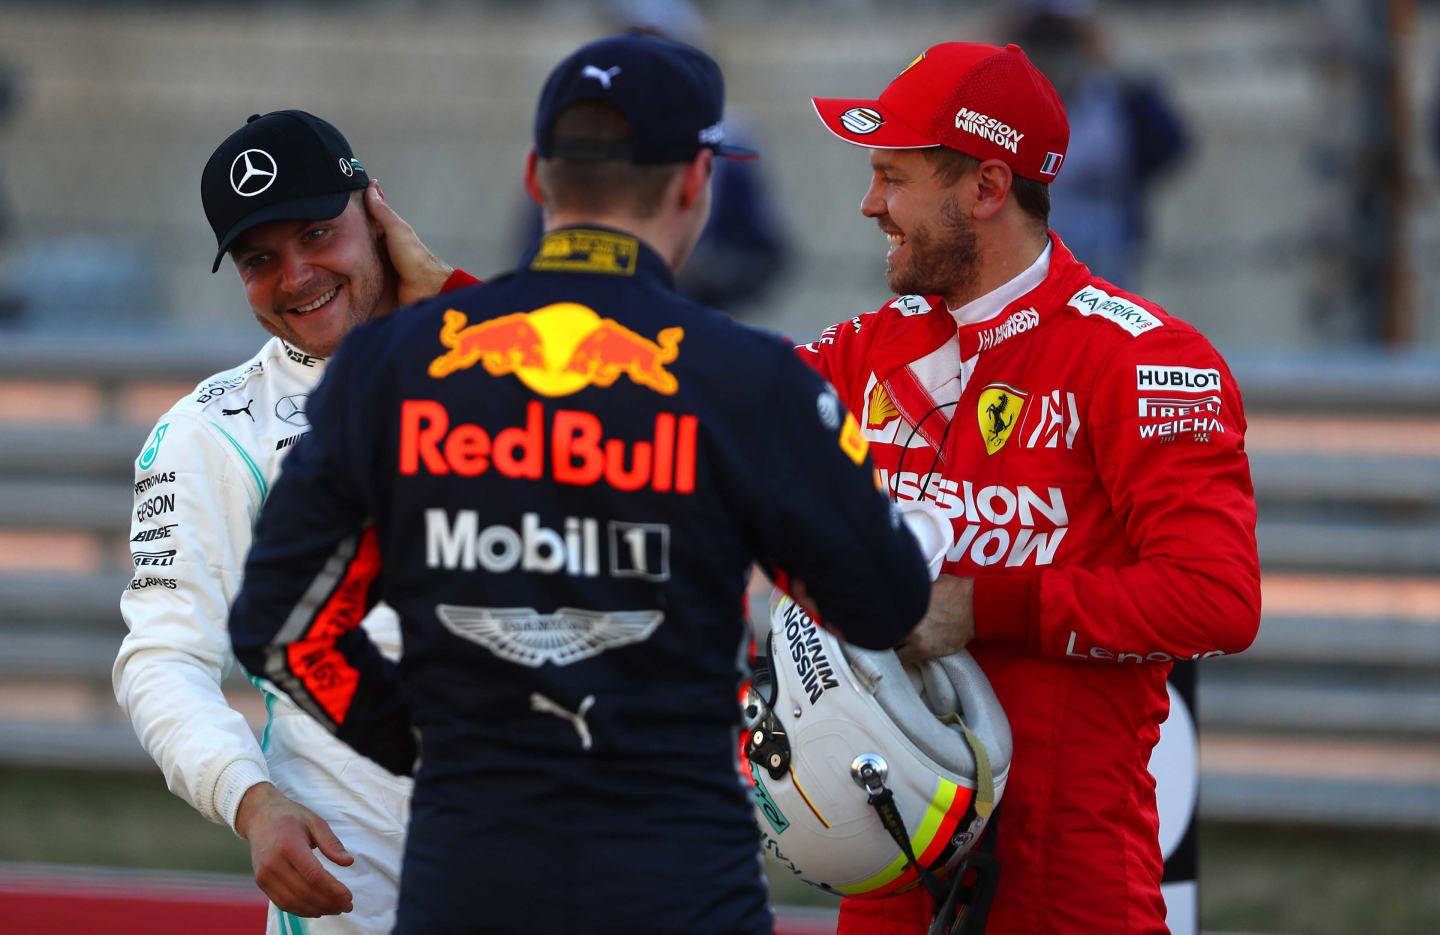 AUSTIN, TEXAS - NOVEMBER 02: Top three qualifiers Valtteri Bottas of Finland and Mercedes GP, Sebastian Vettel of Germany and Ferrari and Max Verstappen of Netherlands and Red Bull Racing celebrate in parc ferme during qualifying for the F1 Grand Prix of USA at Circuit of The Americas on November 02, 2019 in Austin, Texas. (Photo by Mark Thompson/Getty Images)